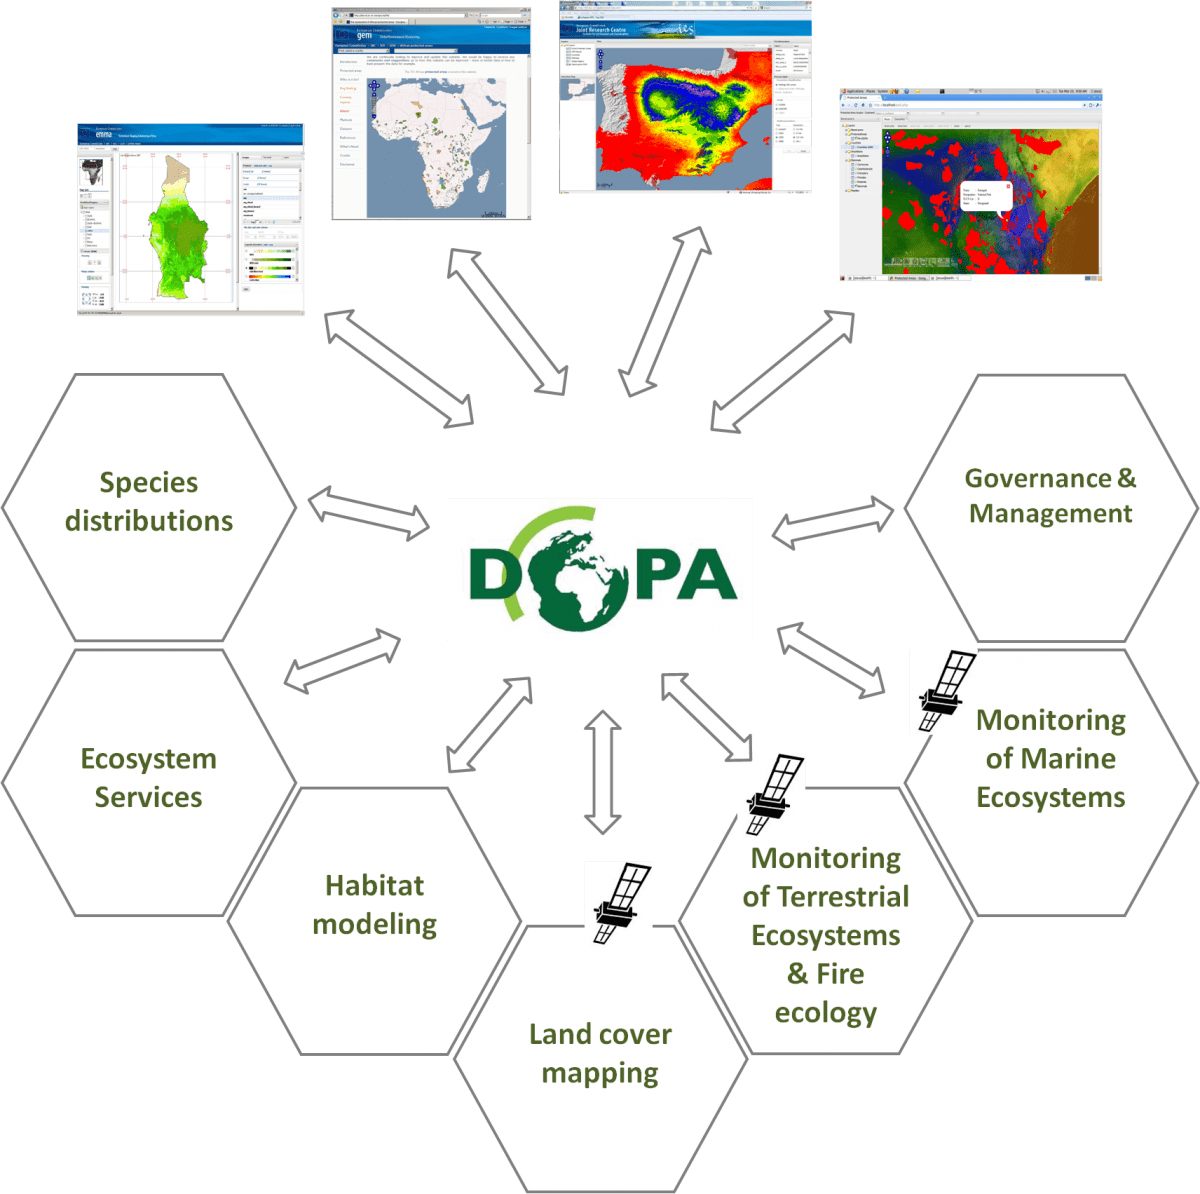 Diagram showing web services being developed at JRC that will be made available by the Digital Observatory for Protected Areas (DOPA).  Credit: DOPA.